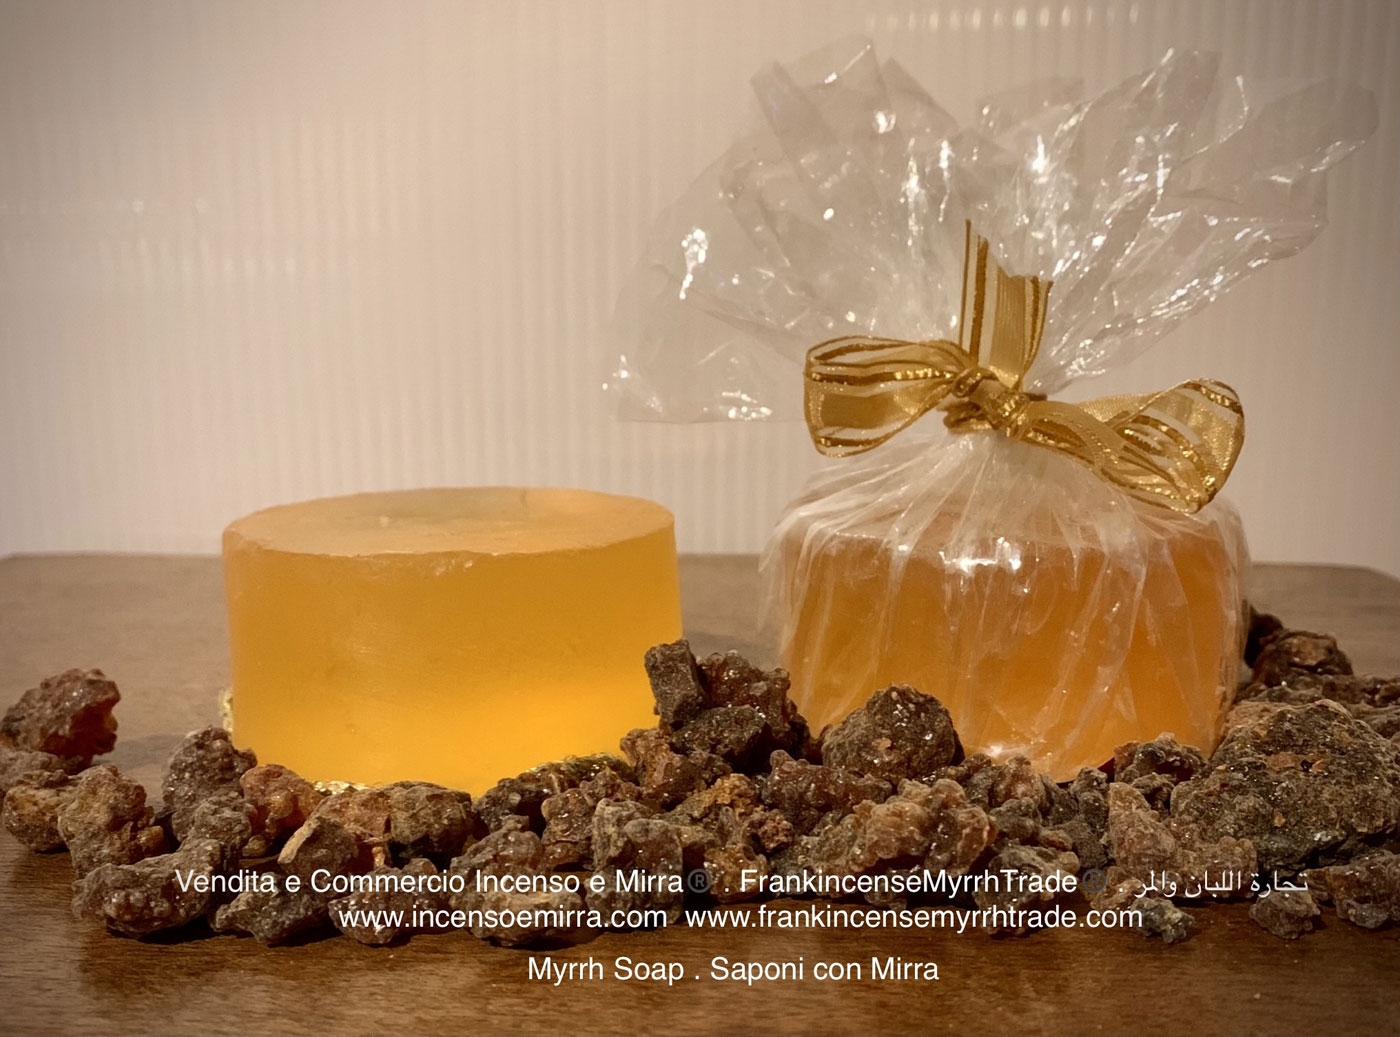 Myrrh Soap With Essential Oil And Raw Resin.